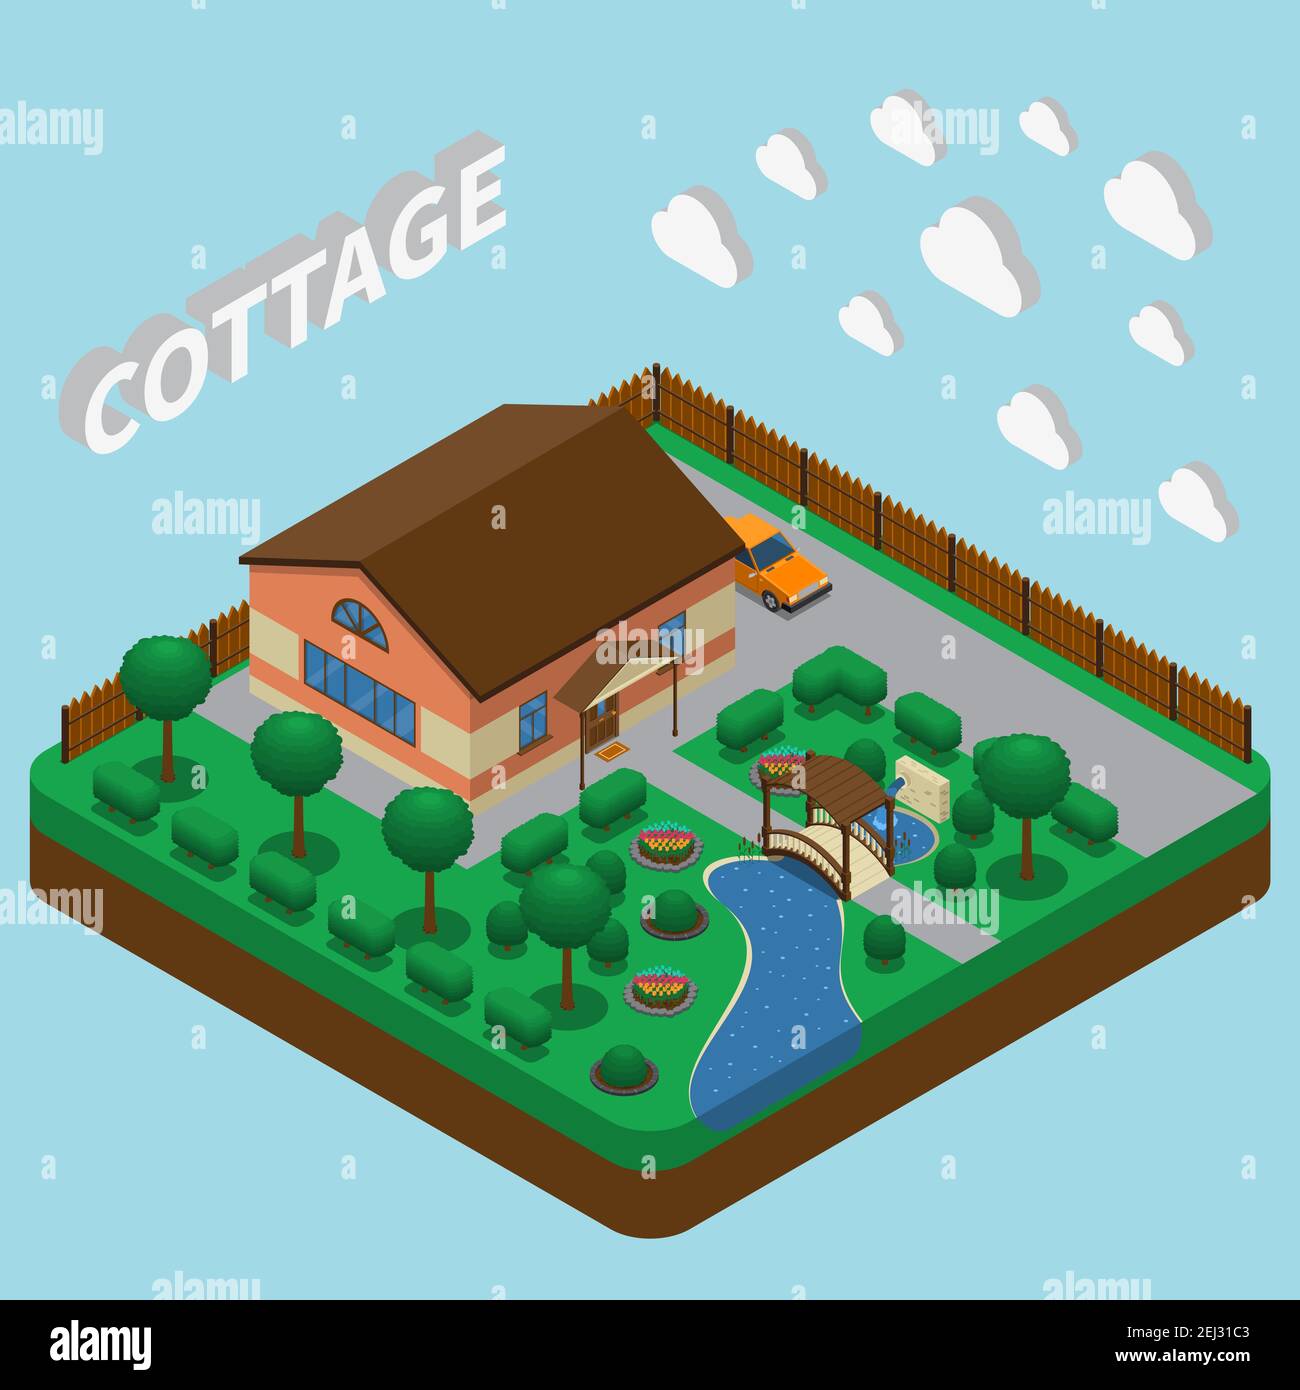 Isometric house composition with 3d text and images of clouds cottage with fenced adjacent territory vector illustration Stock Vector